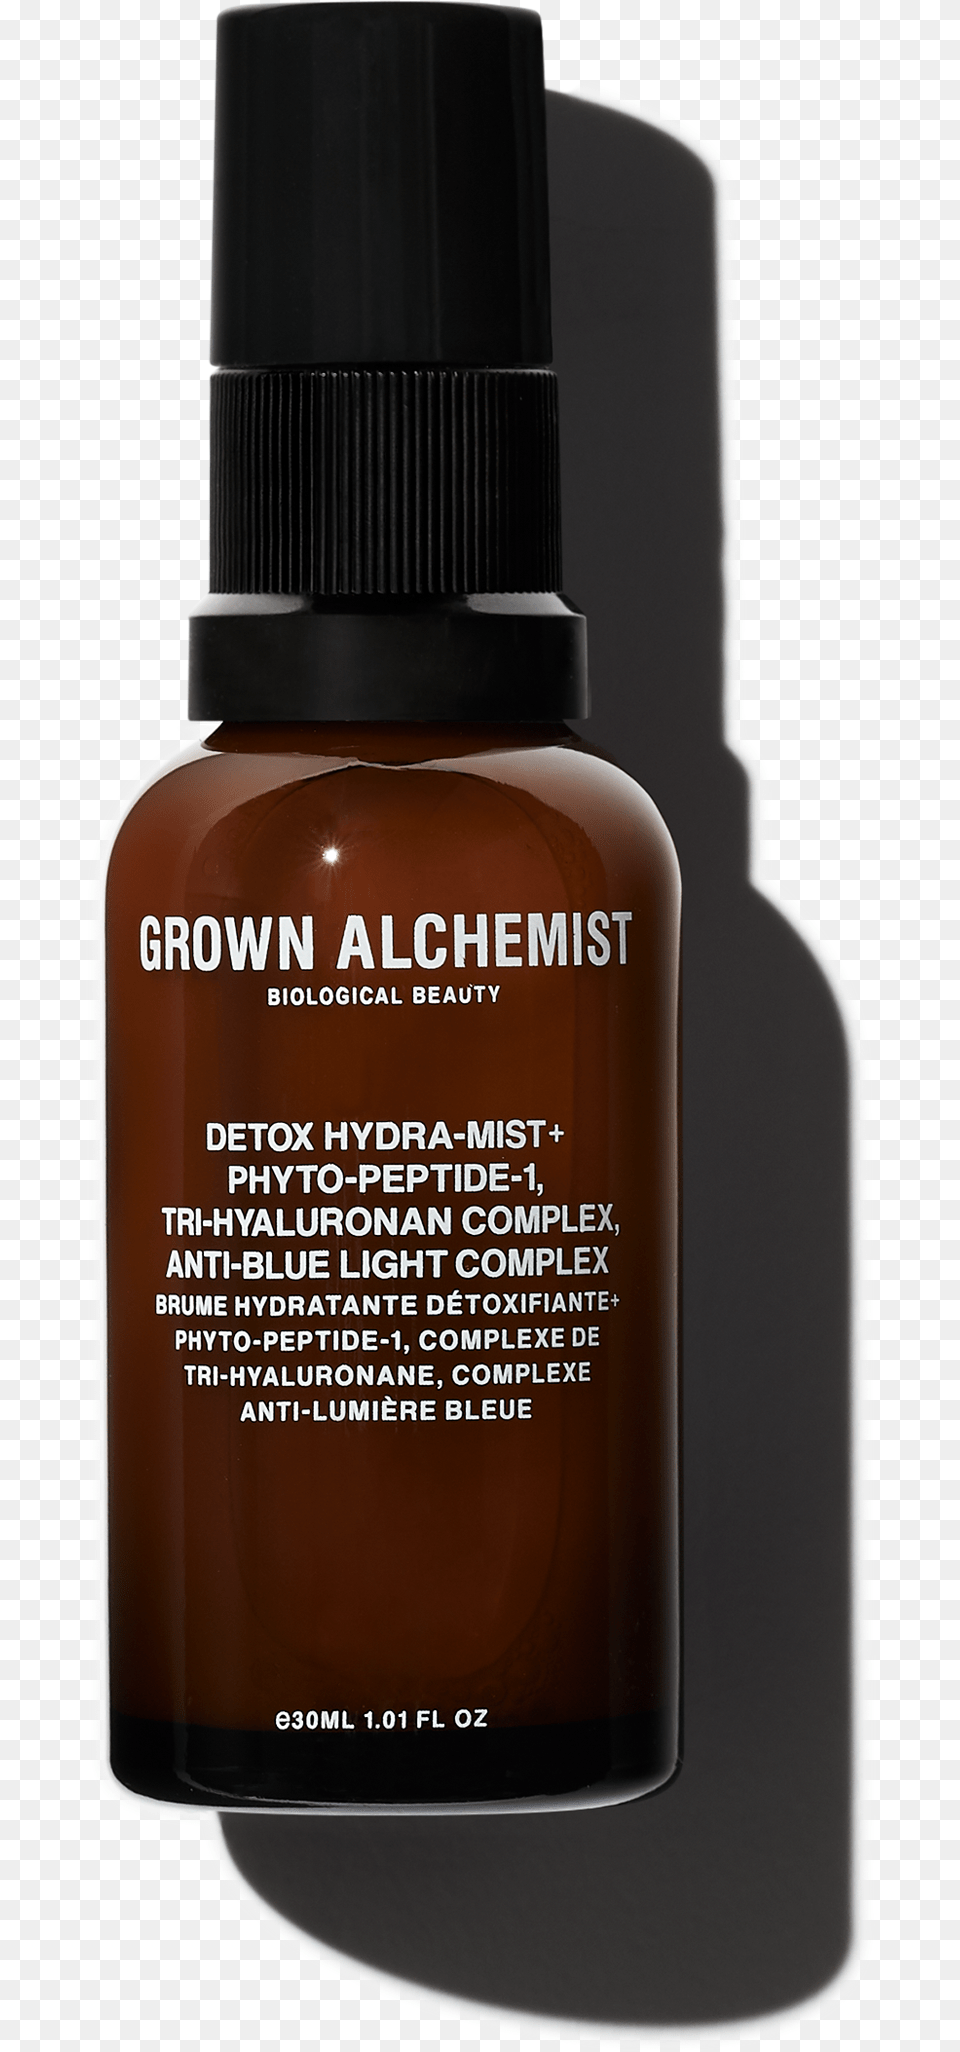 Detox Hydra Mist Cosmetics, Bottle, Perfume, Aftershave Free Png Download